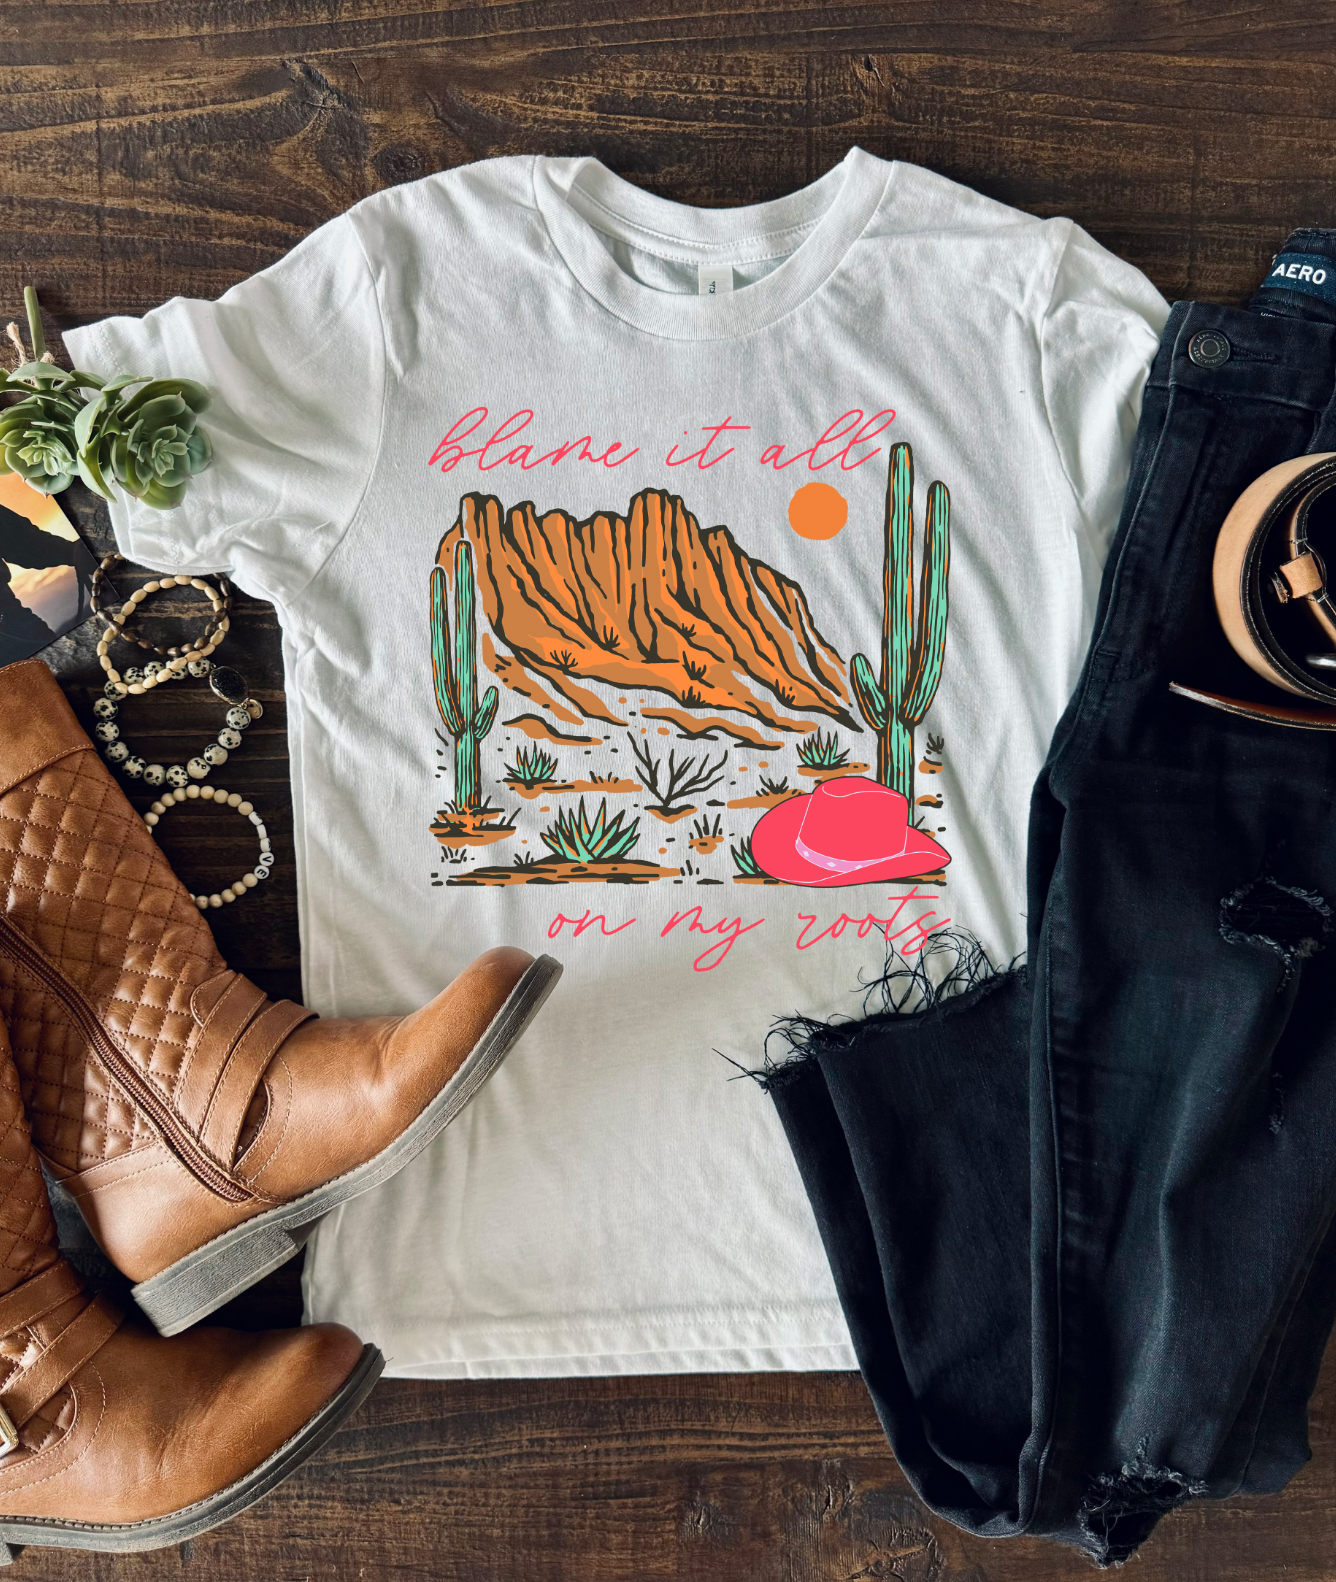 Blame it all on my roots. Bella and Canvas soft tee in White. Hand made and shipped from Texas.